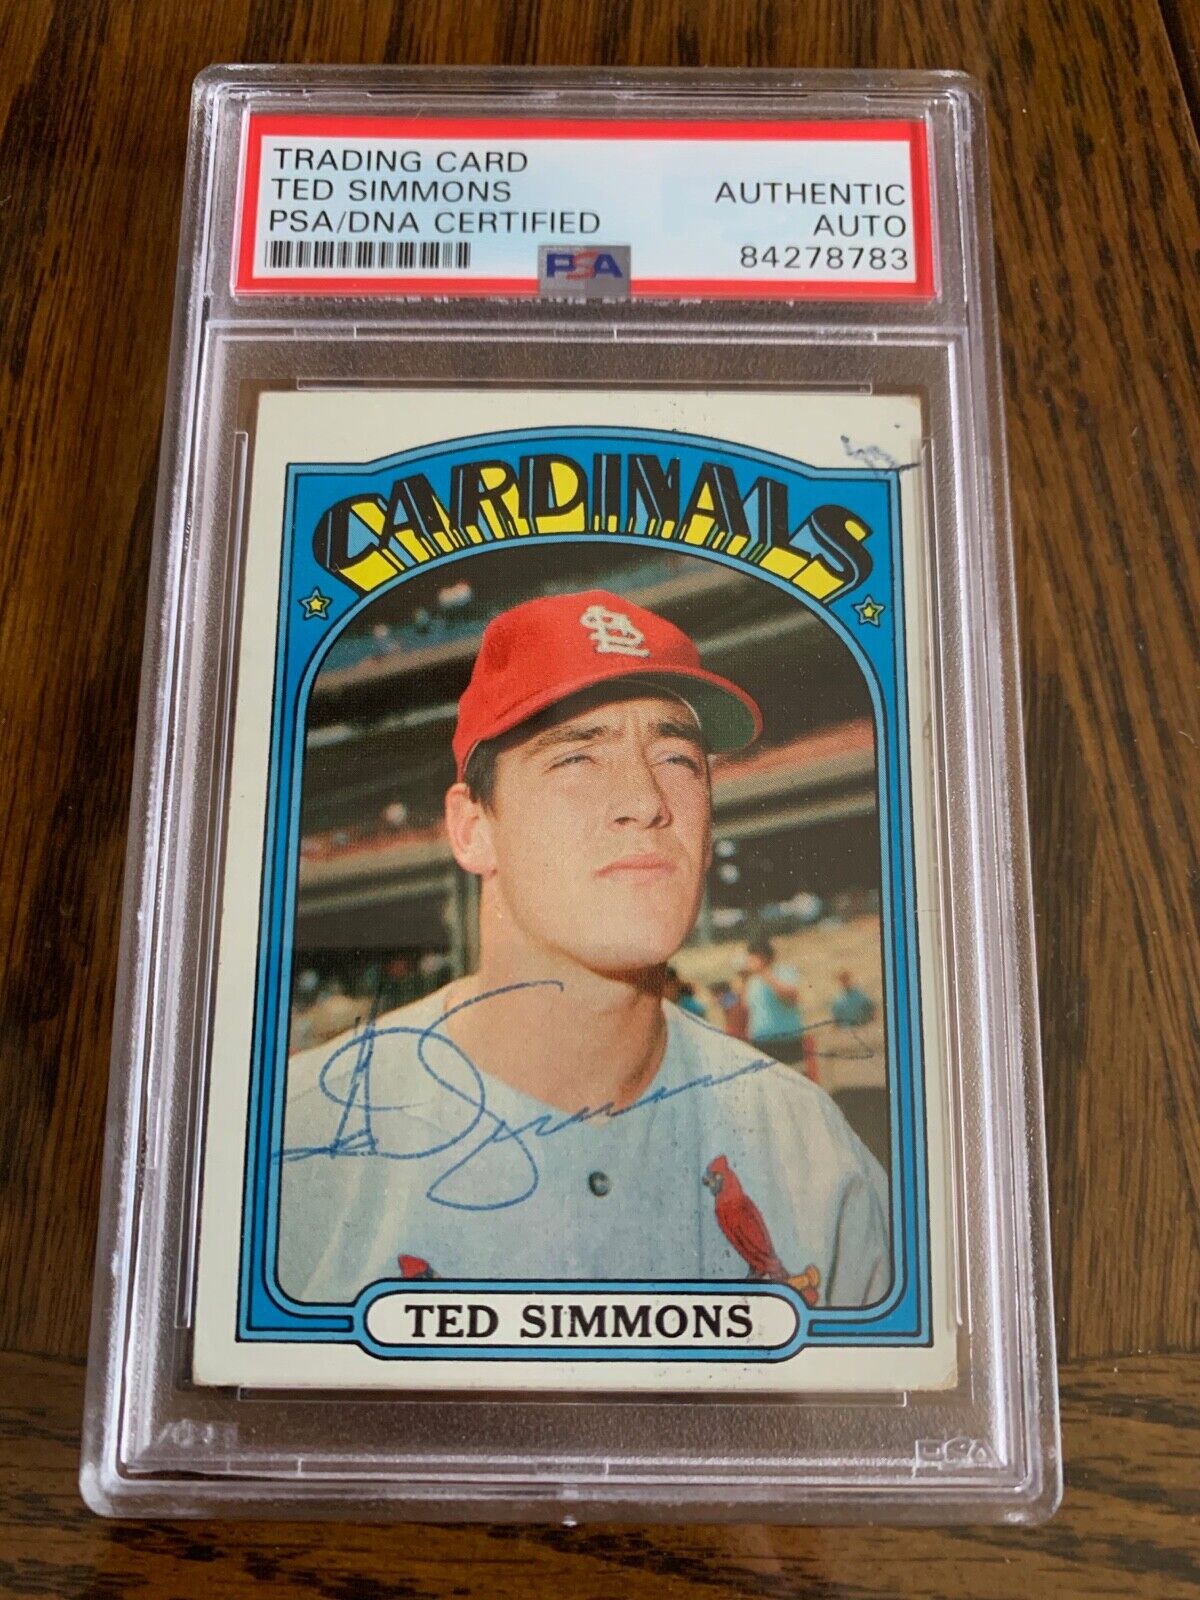 Ted Simmons Autographed Signed 1972 Topps Card 154 PSA Slabbed Certified MLB